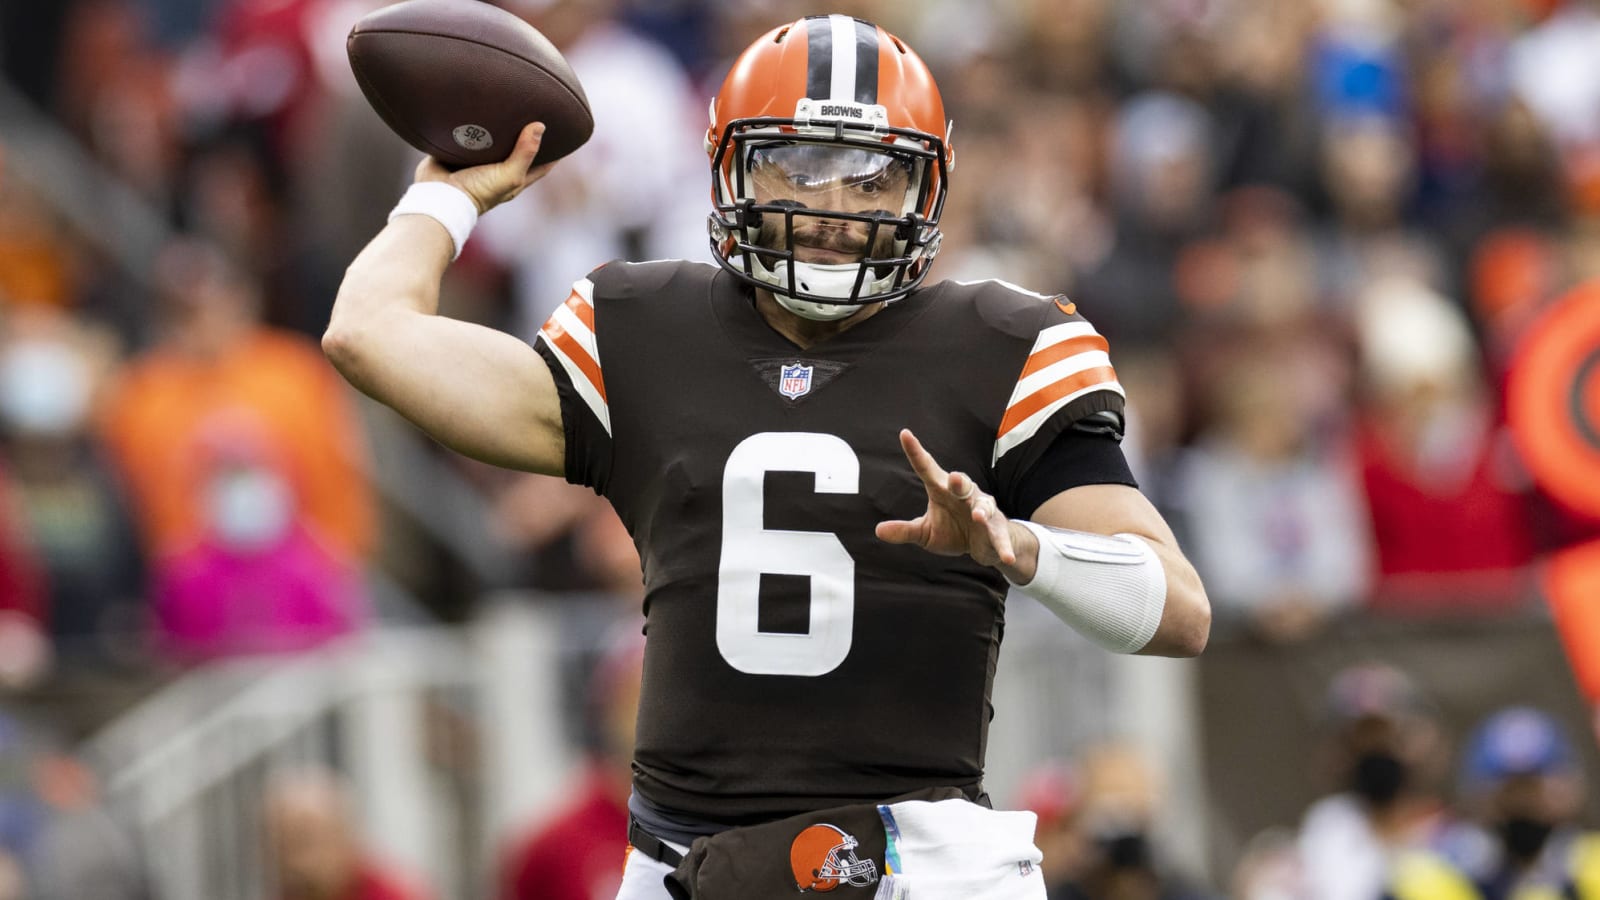 Browns OC expects QB Baker Mayfield to play vs. Lions